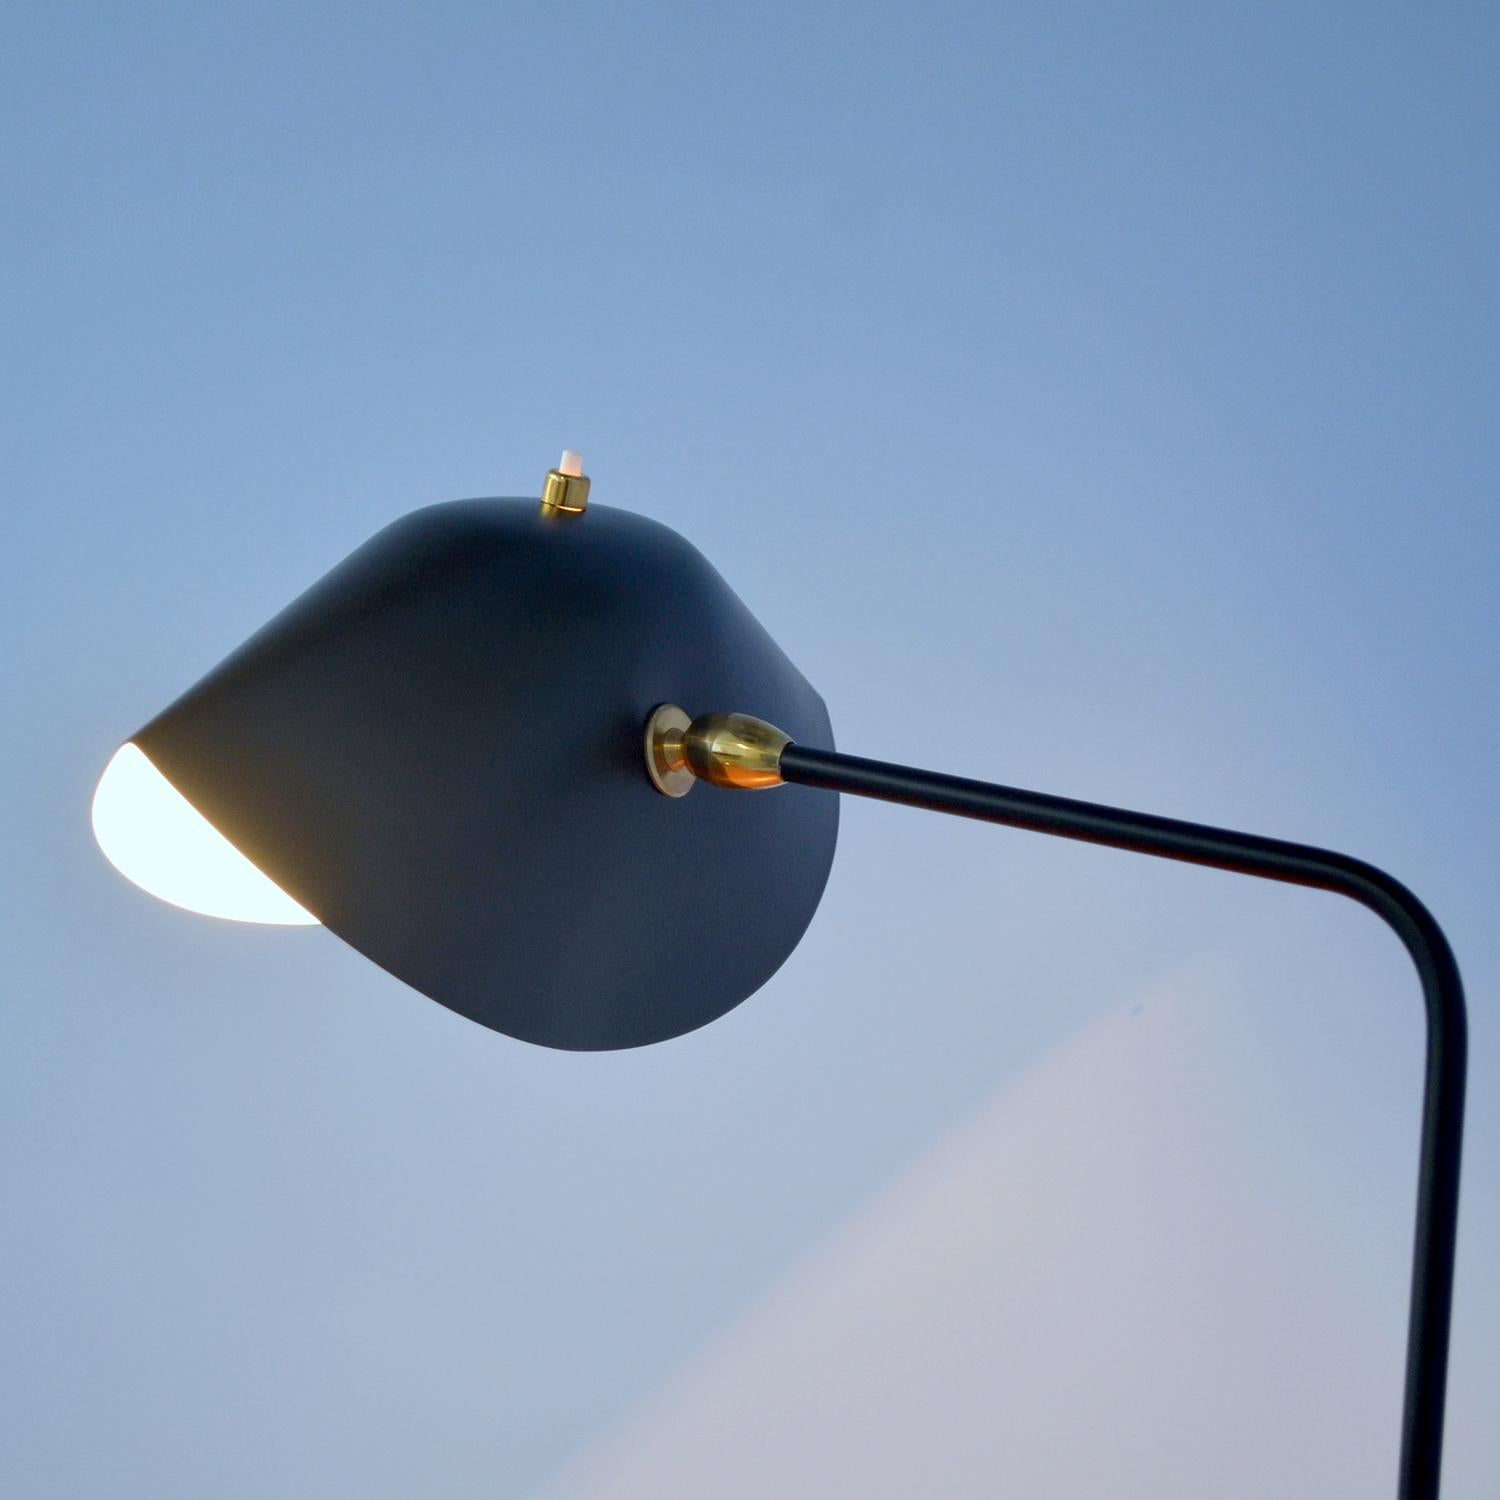 French Serge Mouille - Agrafee Desk Lamp in Black - IN STOCK! For Sale